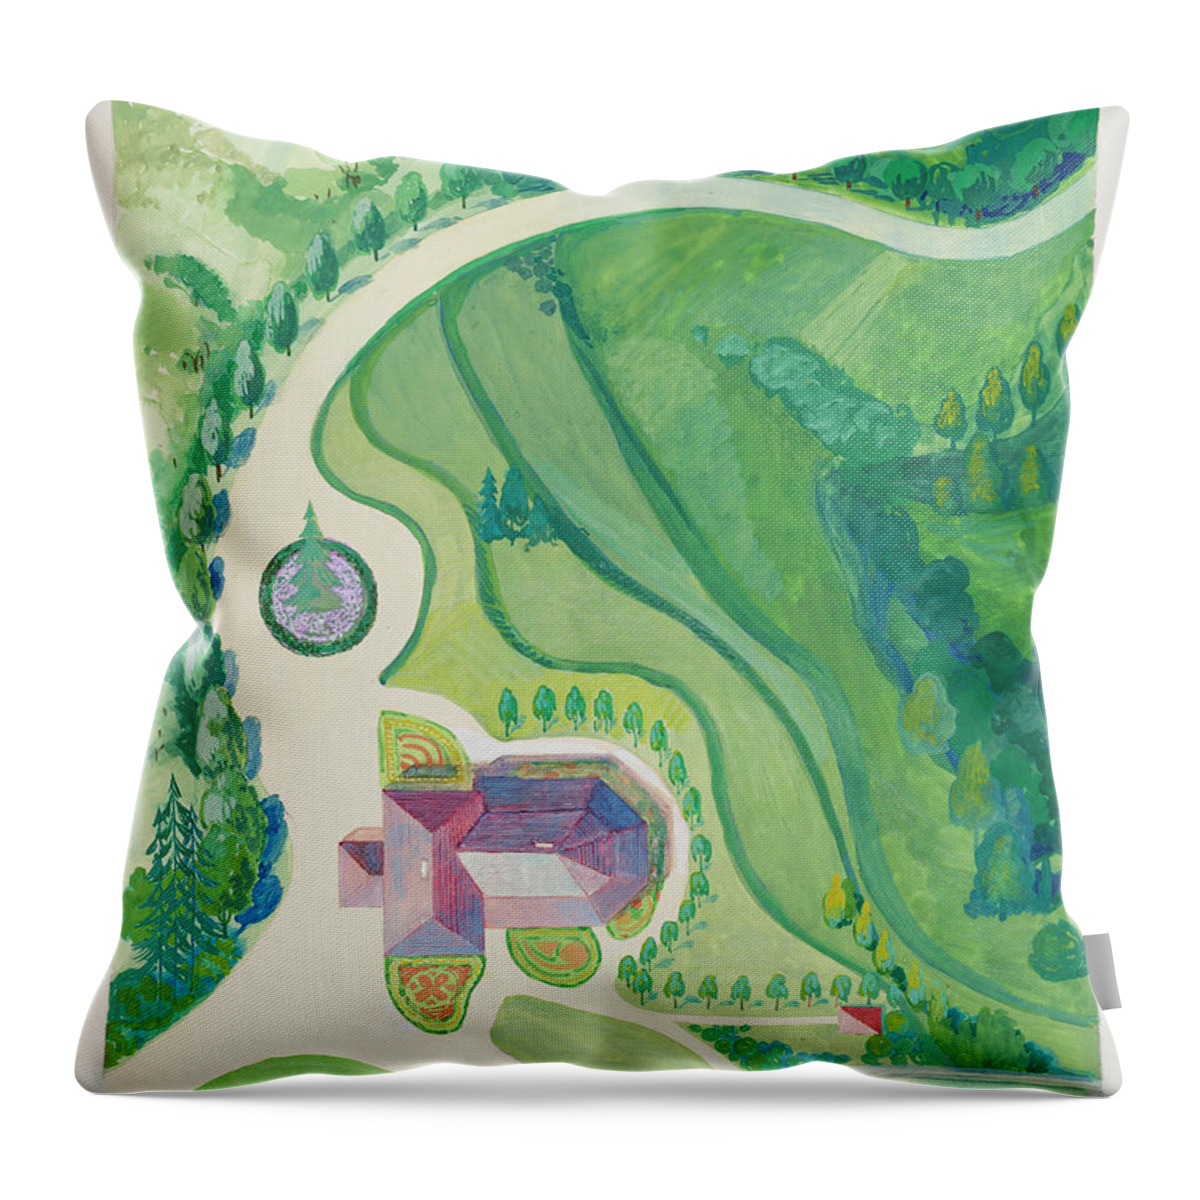 Antique Throw Pillow featuring the painting Peter K. Knapp Estate by MotionAge Designs